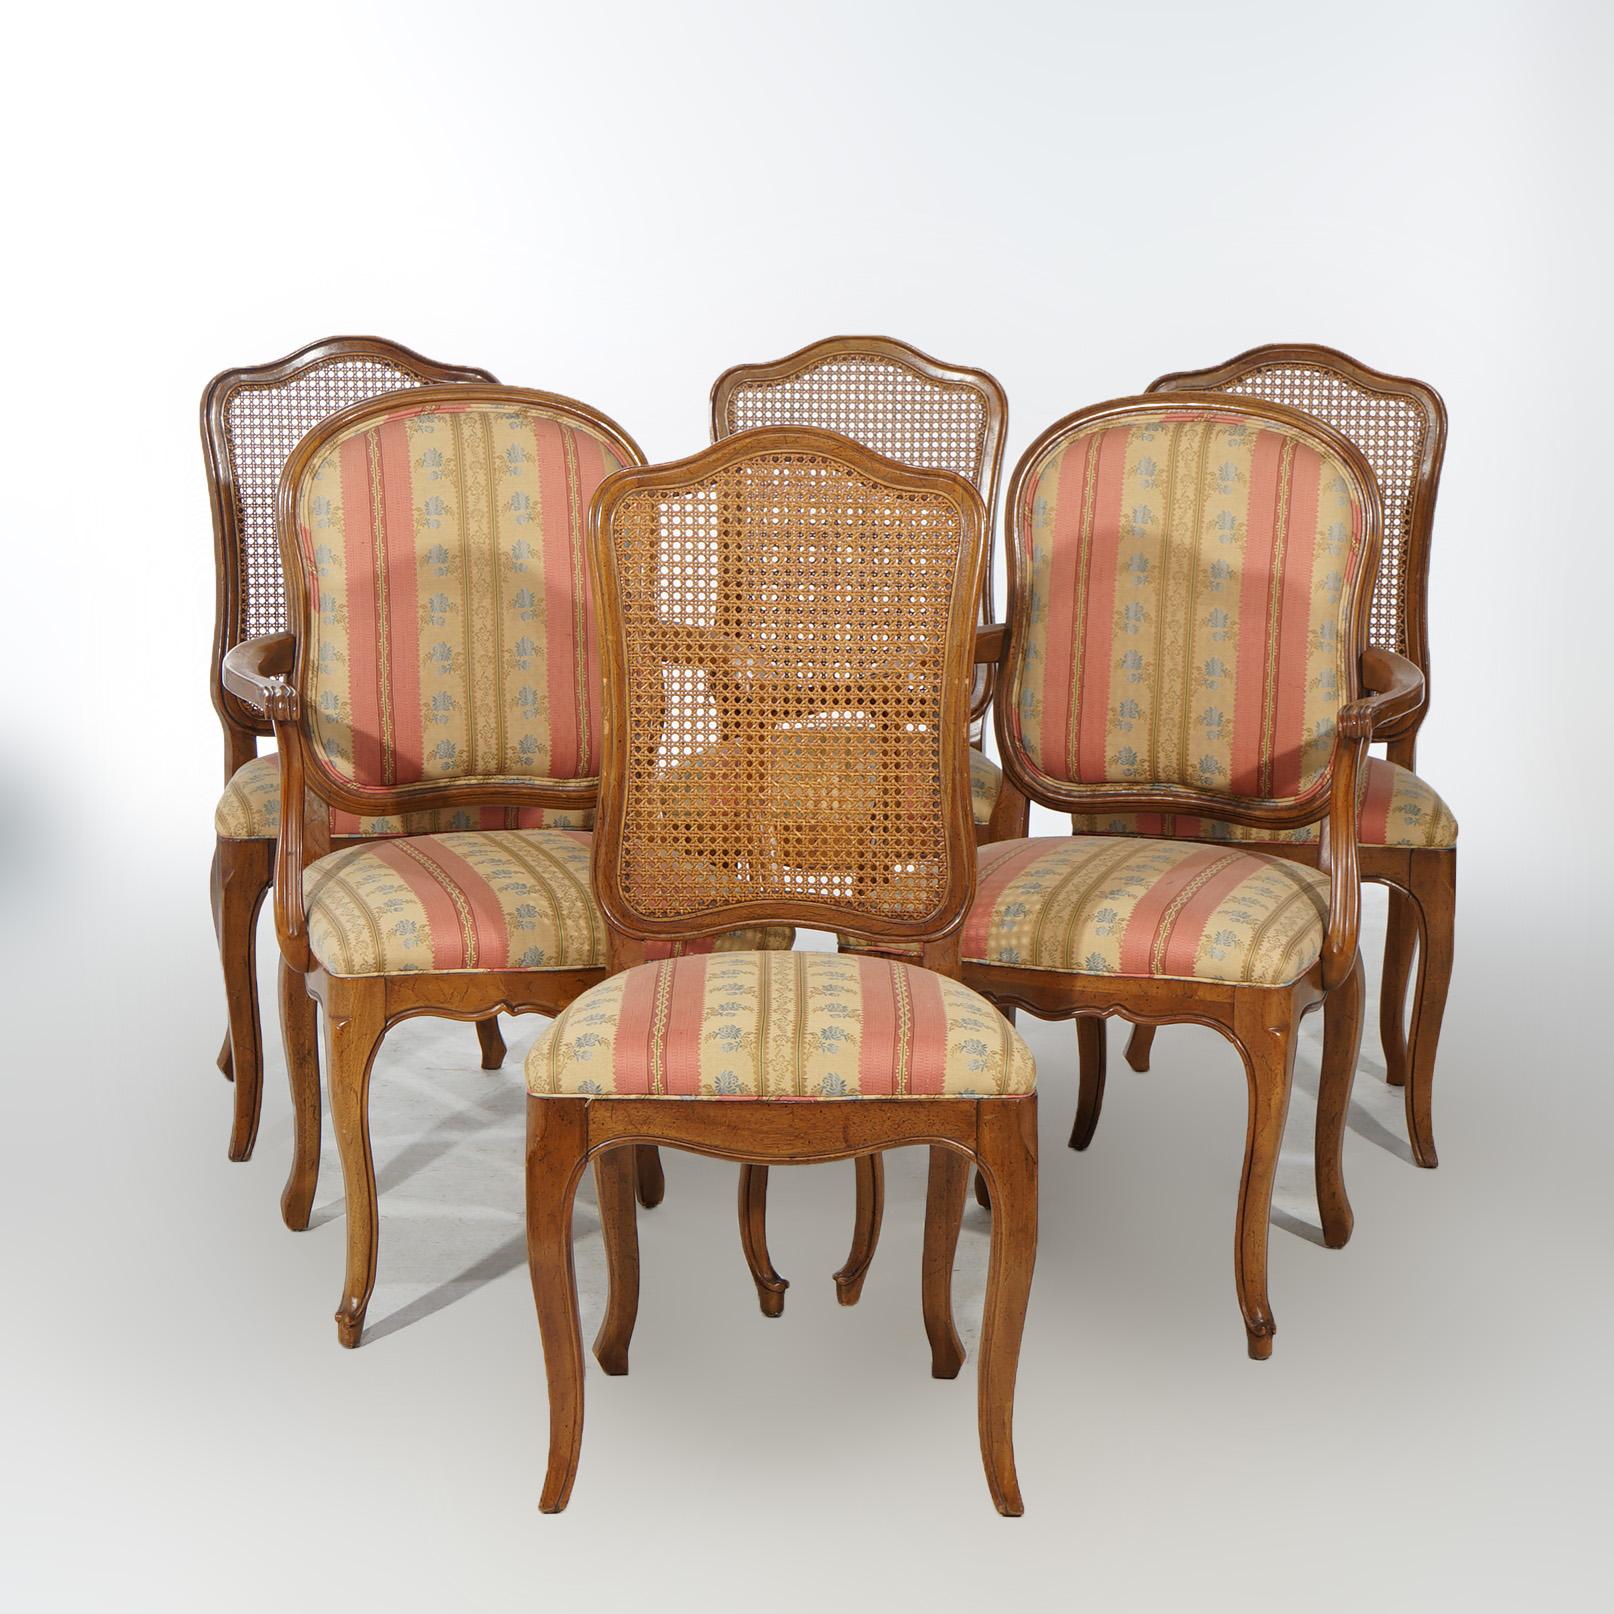 A set of six dining chairs offer mahogany construction and having shaped backs with upholstered seats raised on cabriole legs; set includes four side chairs with caned backs and two armchairs with upholstered backs; 20th century.

Measures -